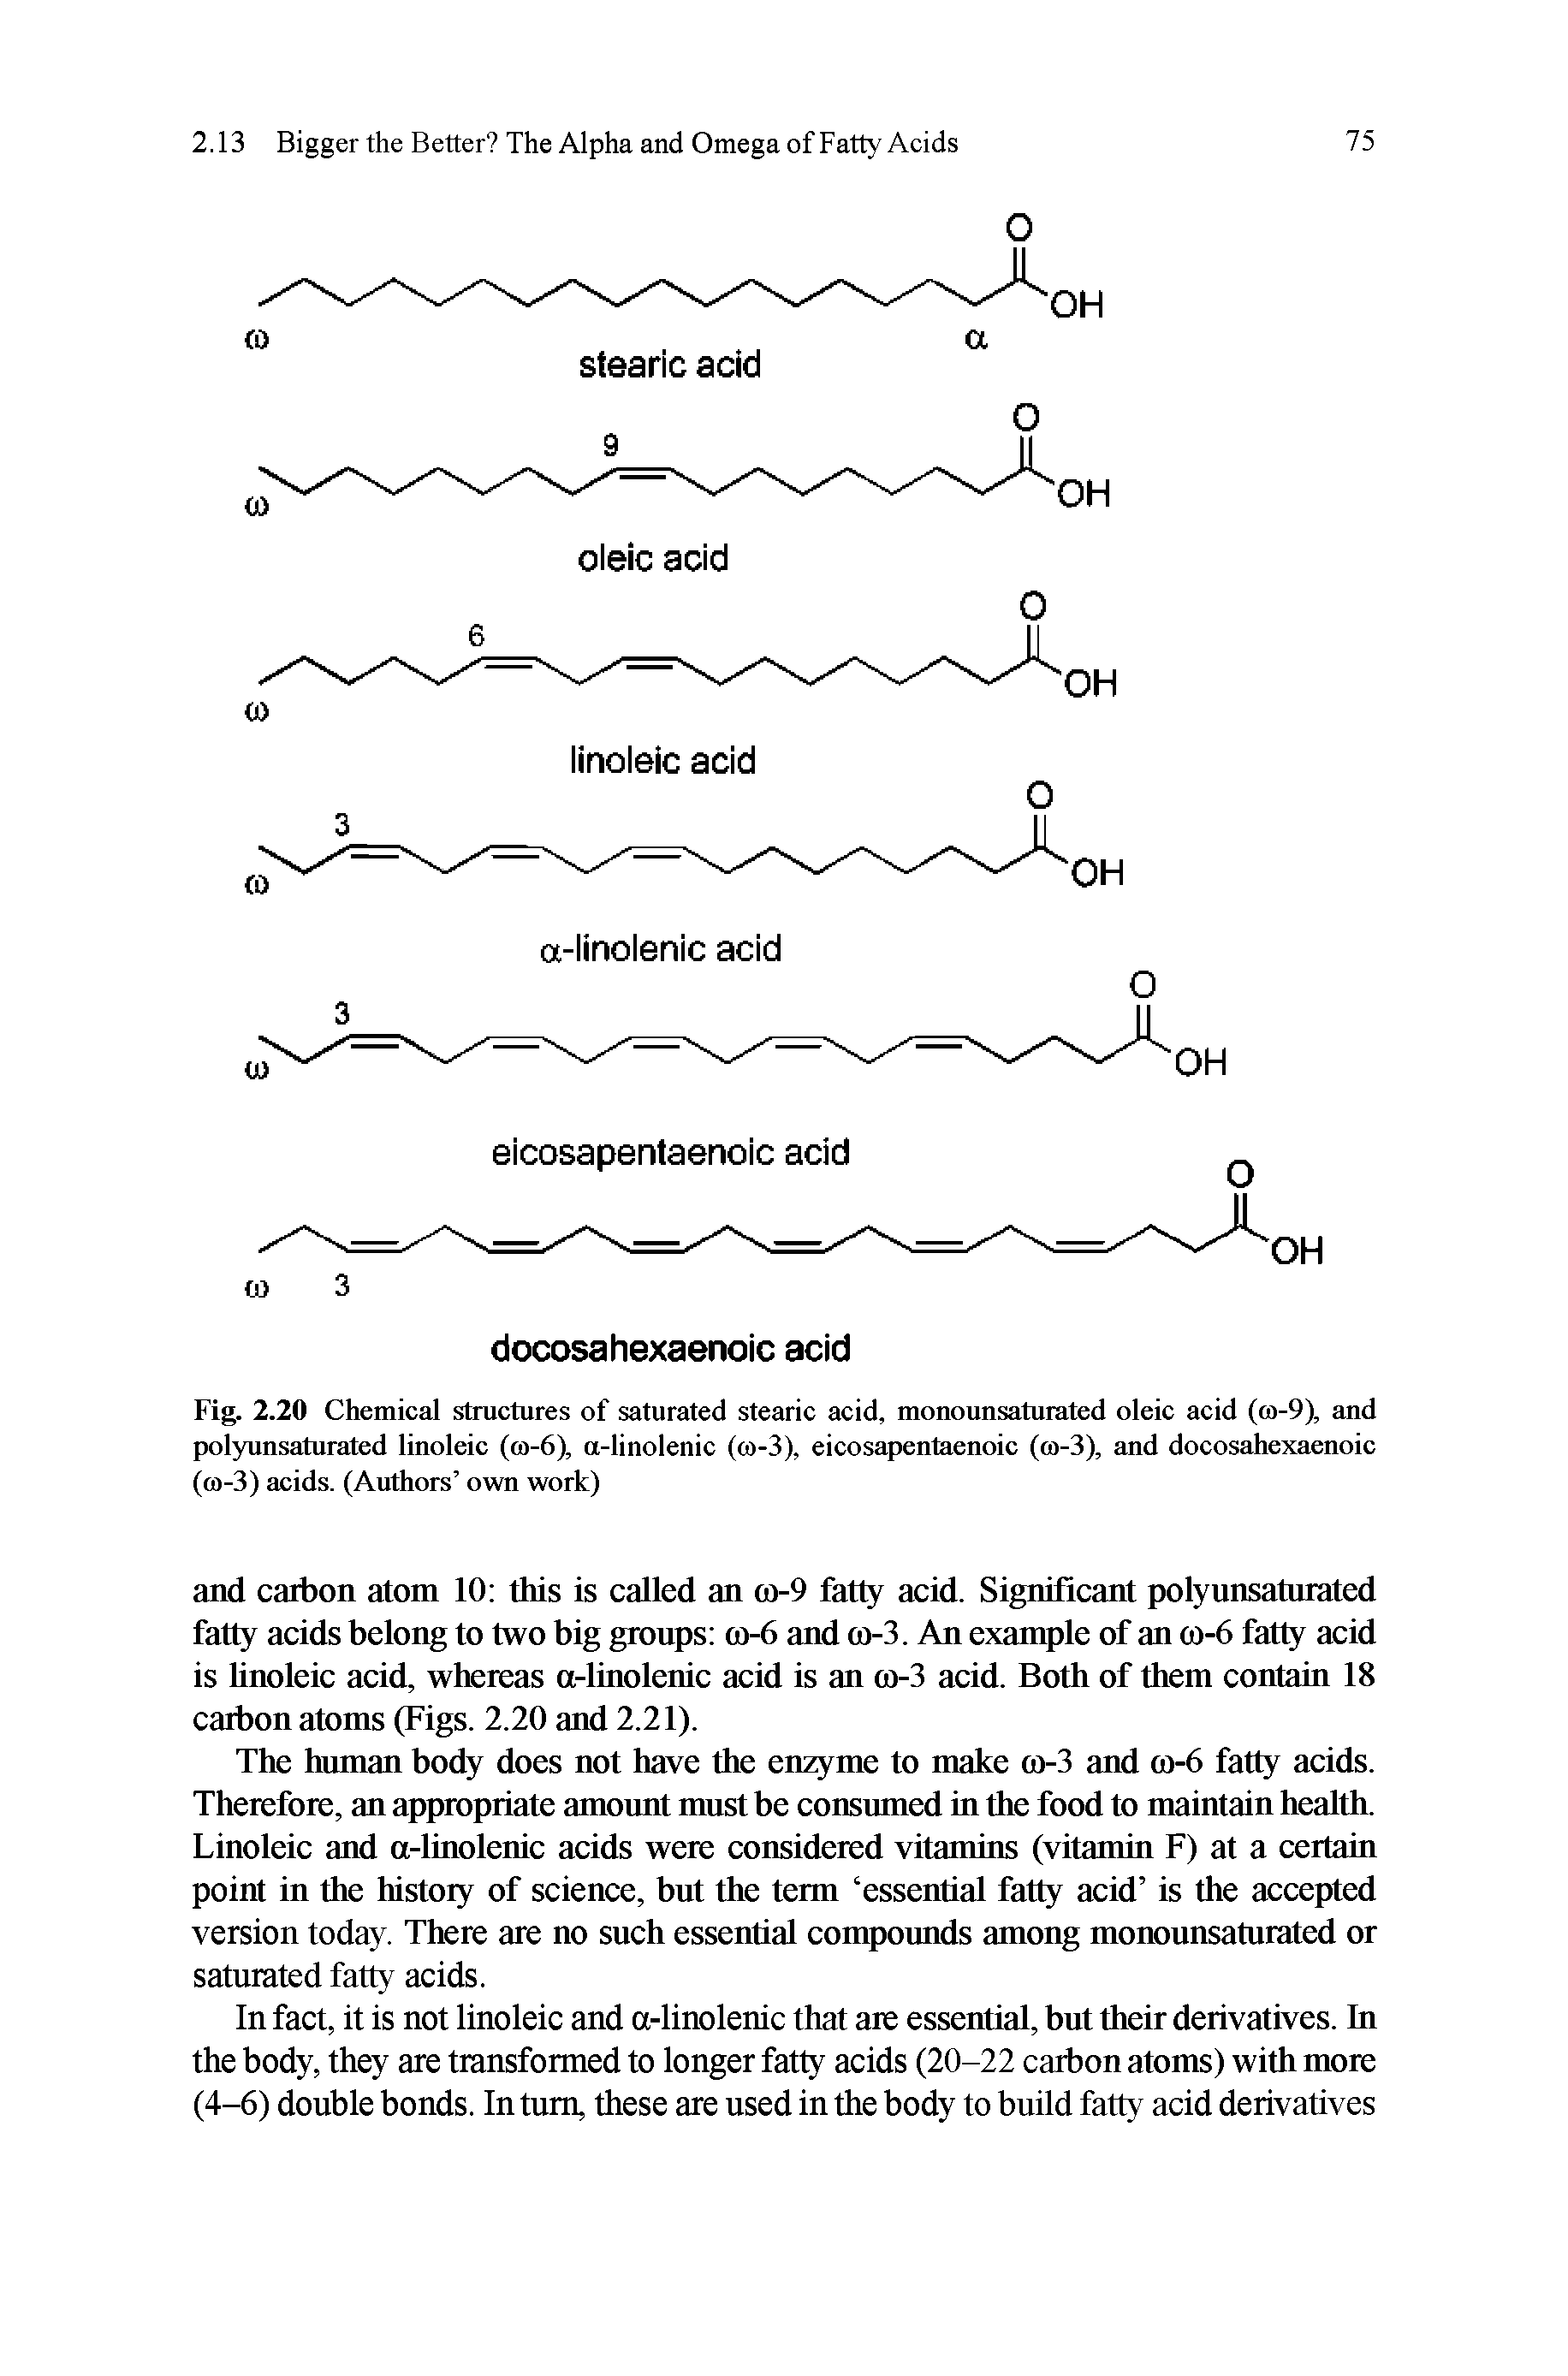 Fig. 2.20 Chemical structures of saturated stearic acid, monounsatuiated oleic acid (to-9), and polyunsaturated linoleic (q>-6), a-linolenic (co-3), eicosapentaenoic (q)-3), and docosahexaenoic (co-3) acids. (Authors own work)...